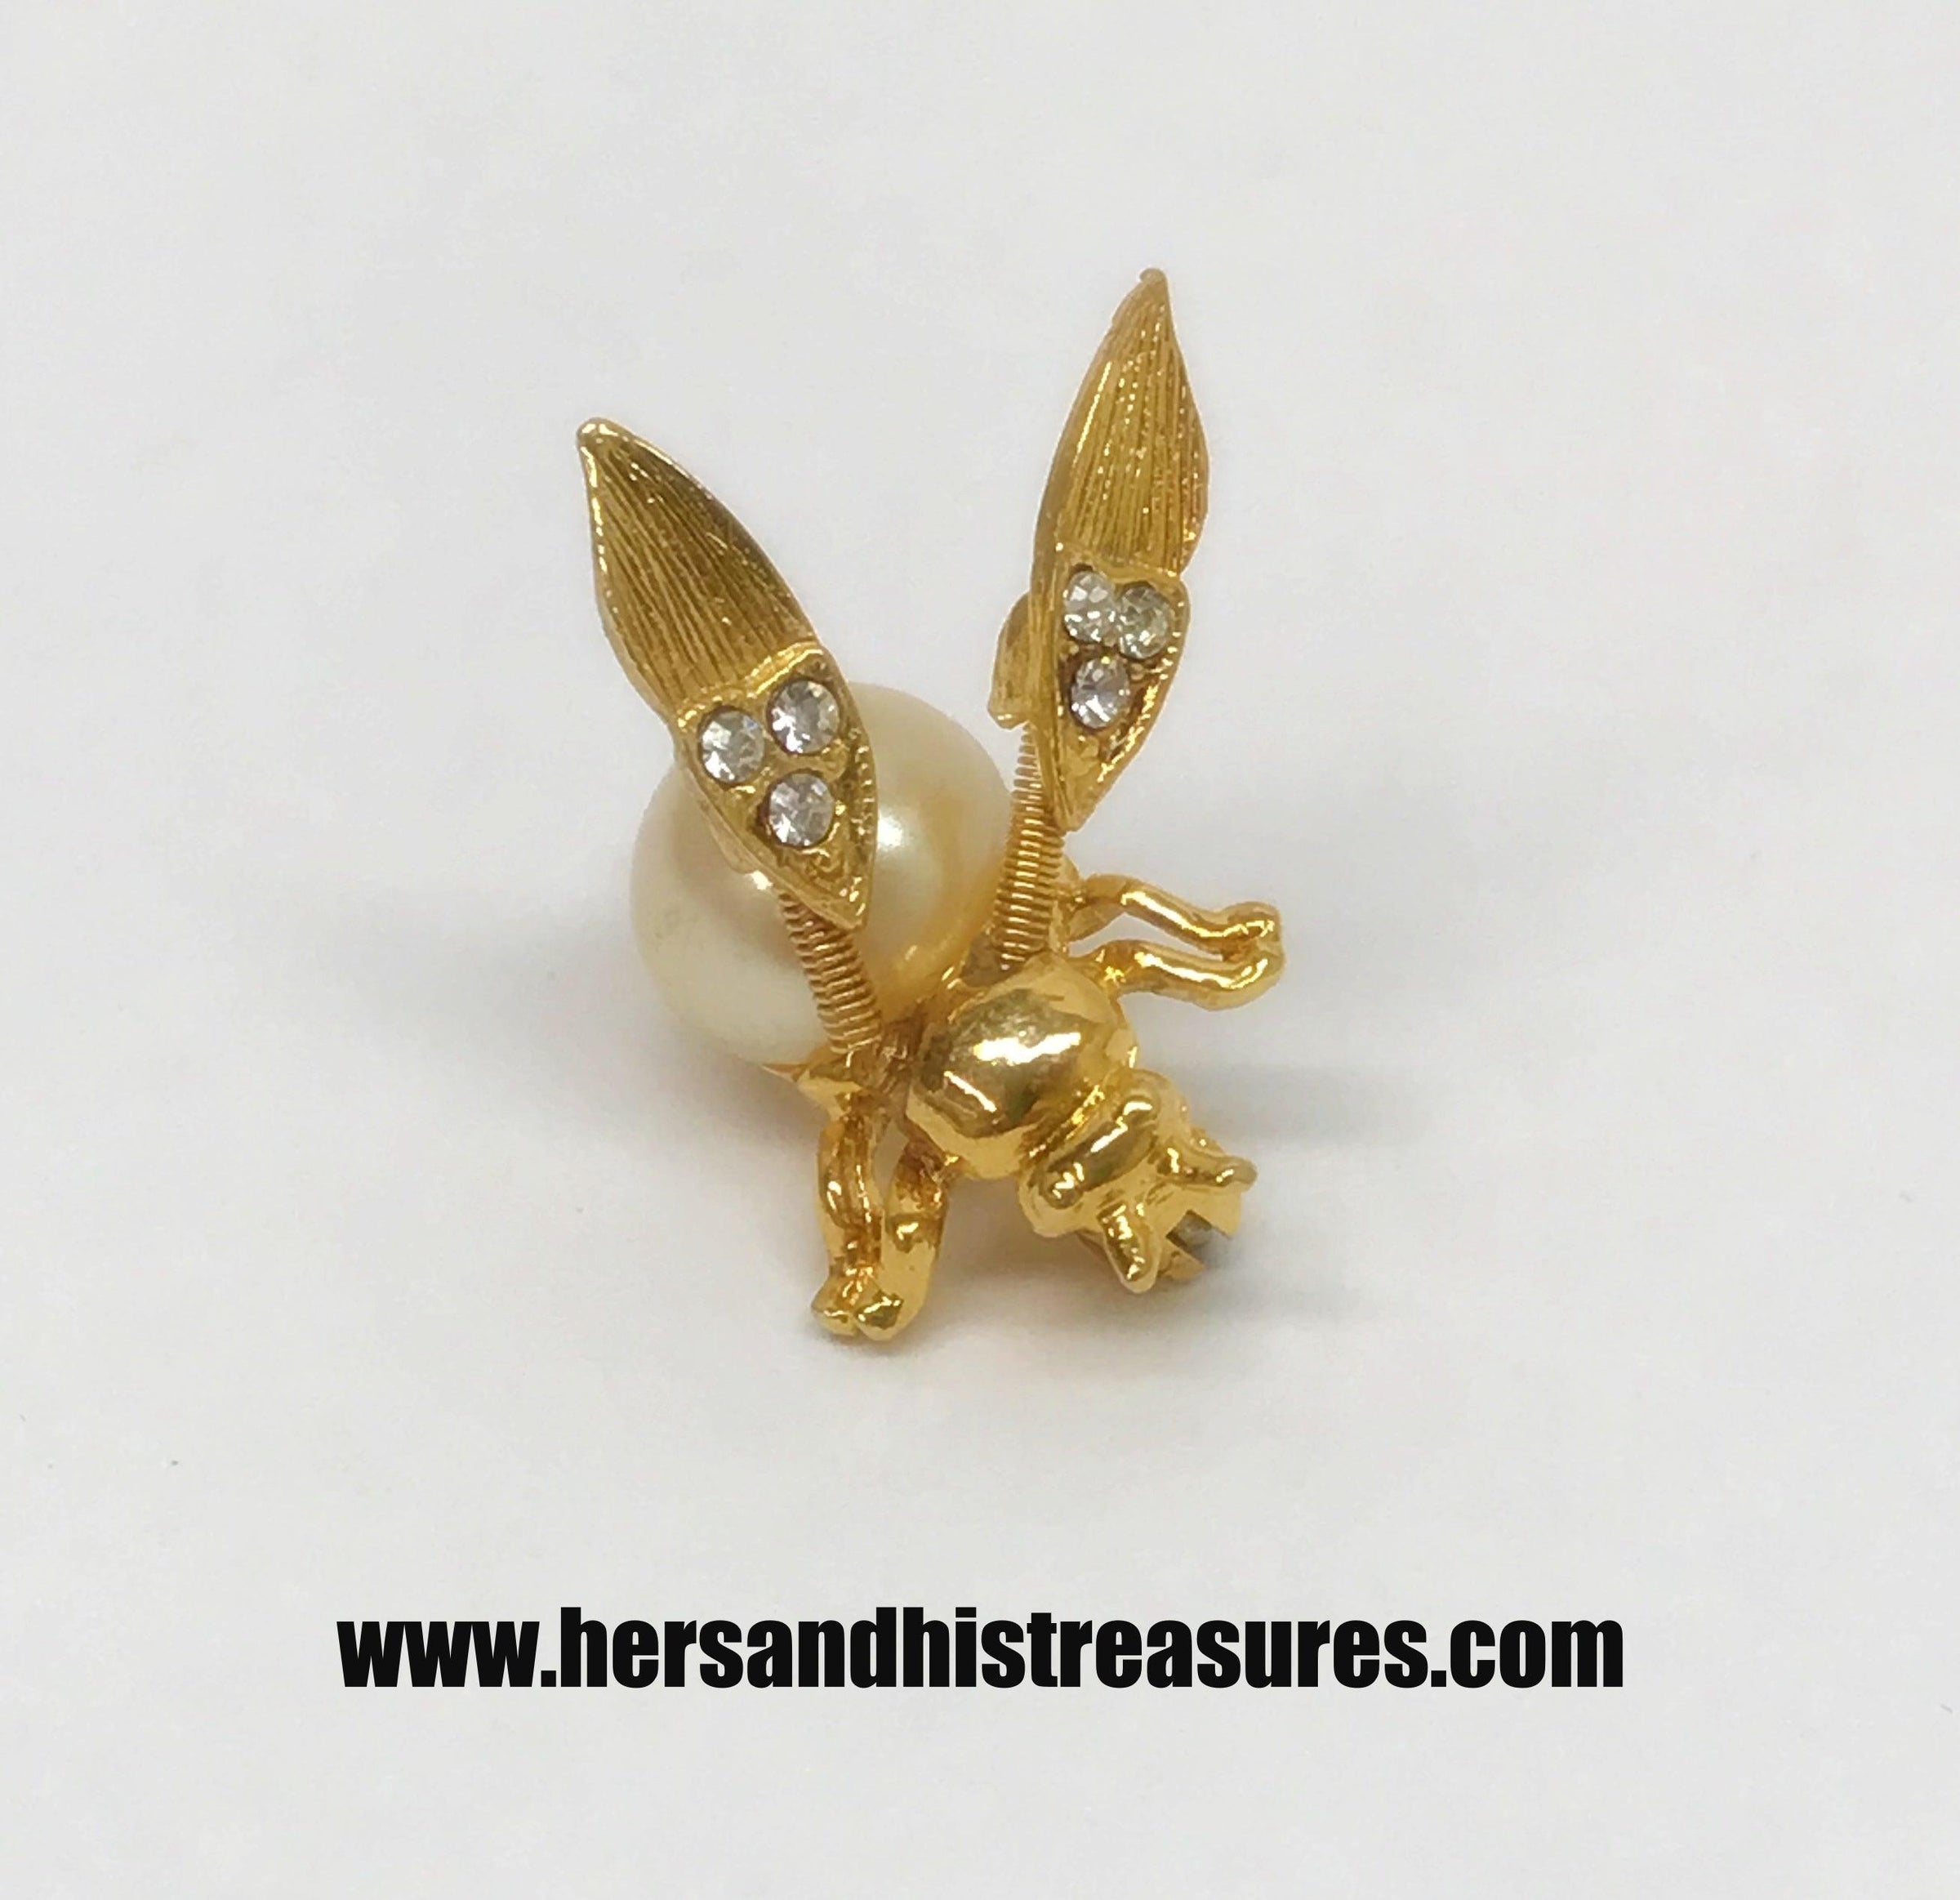 Vintage Simulated Rhinestone Pearl Bee Pin Brooch Antique Pin Women  Brooches Pin Honeybee Costume jewelry Creative Gifts